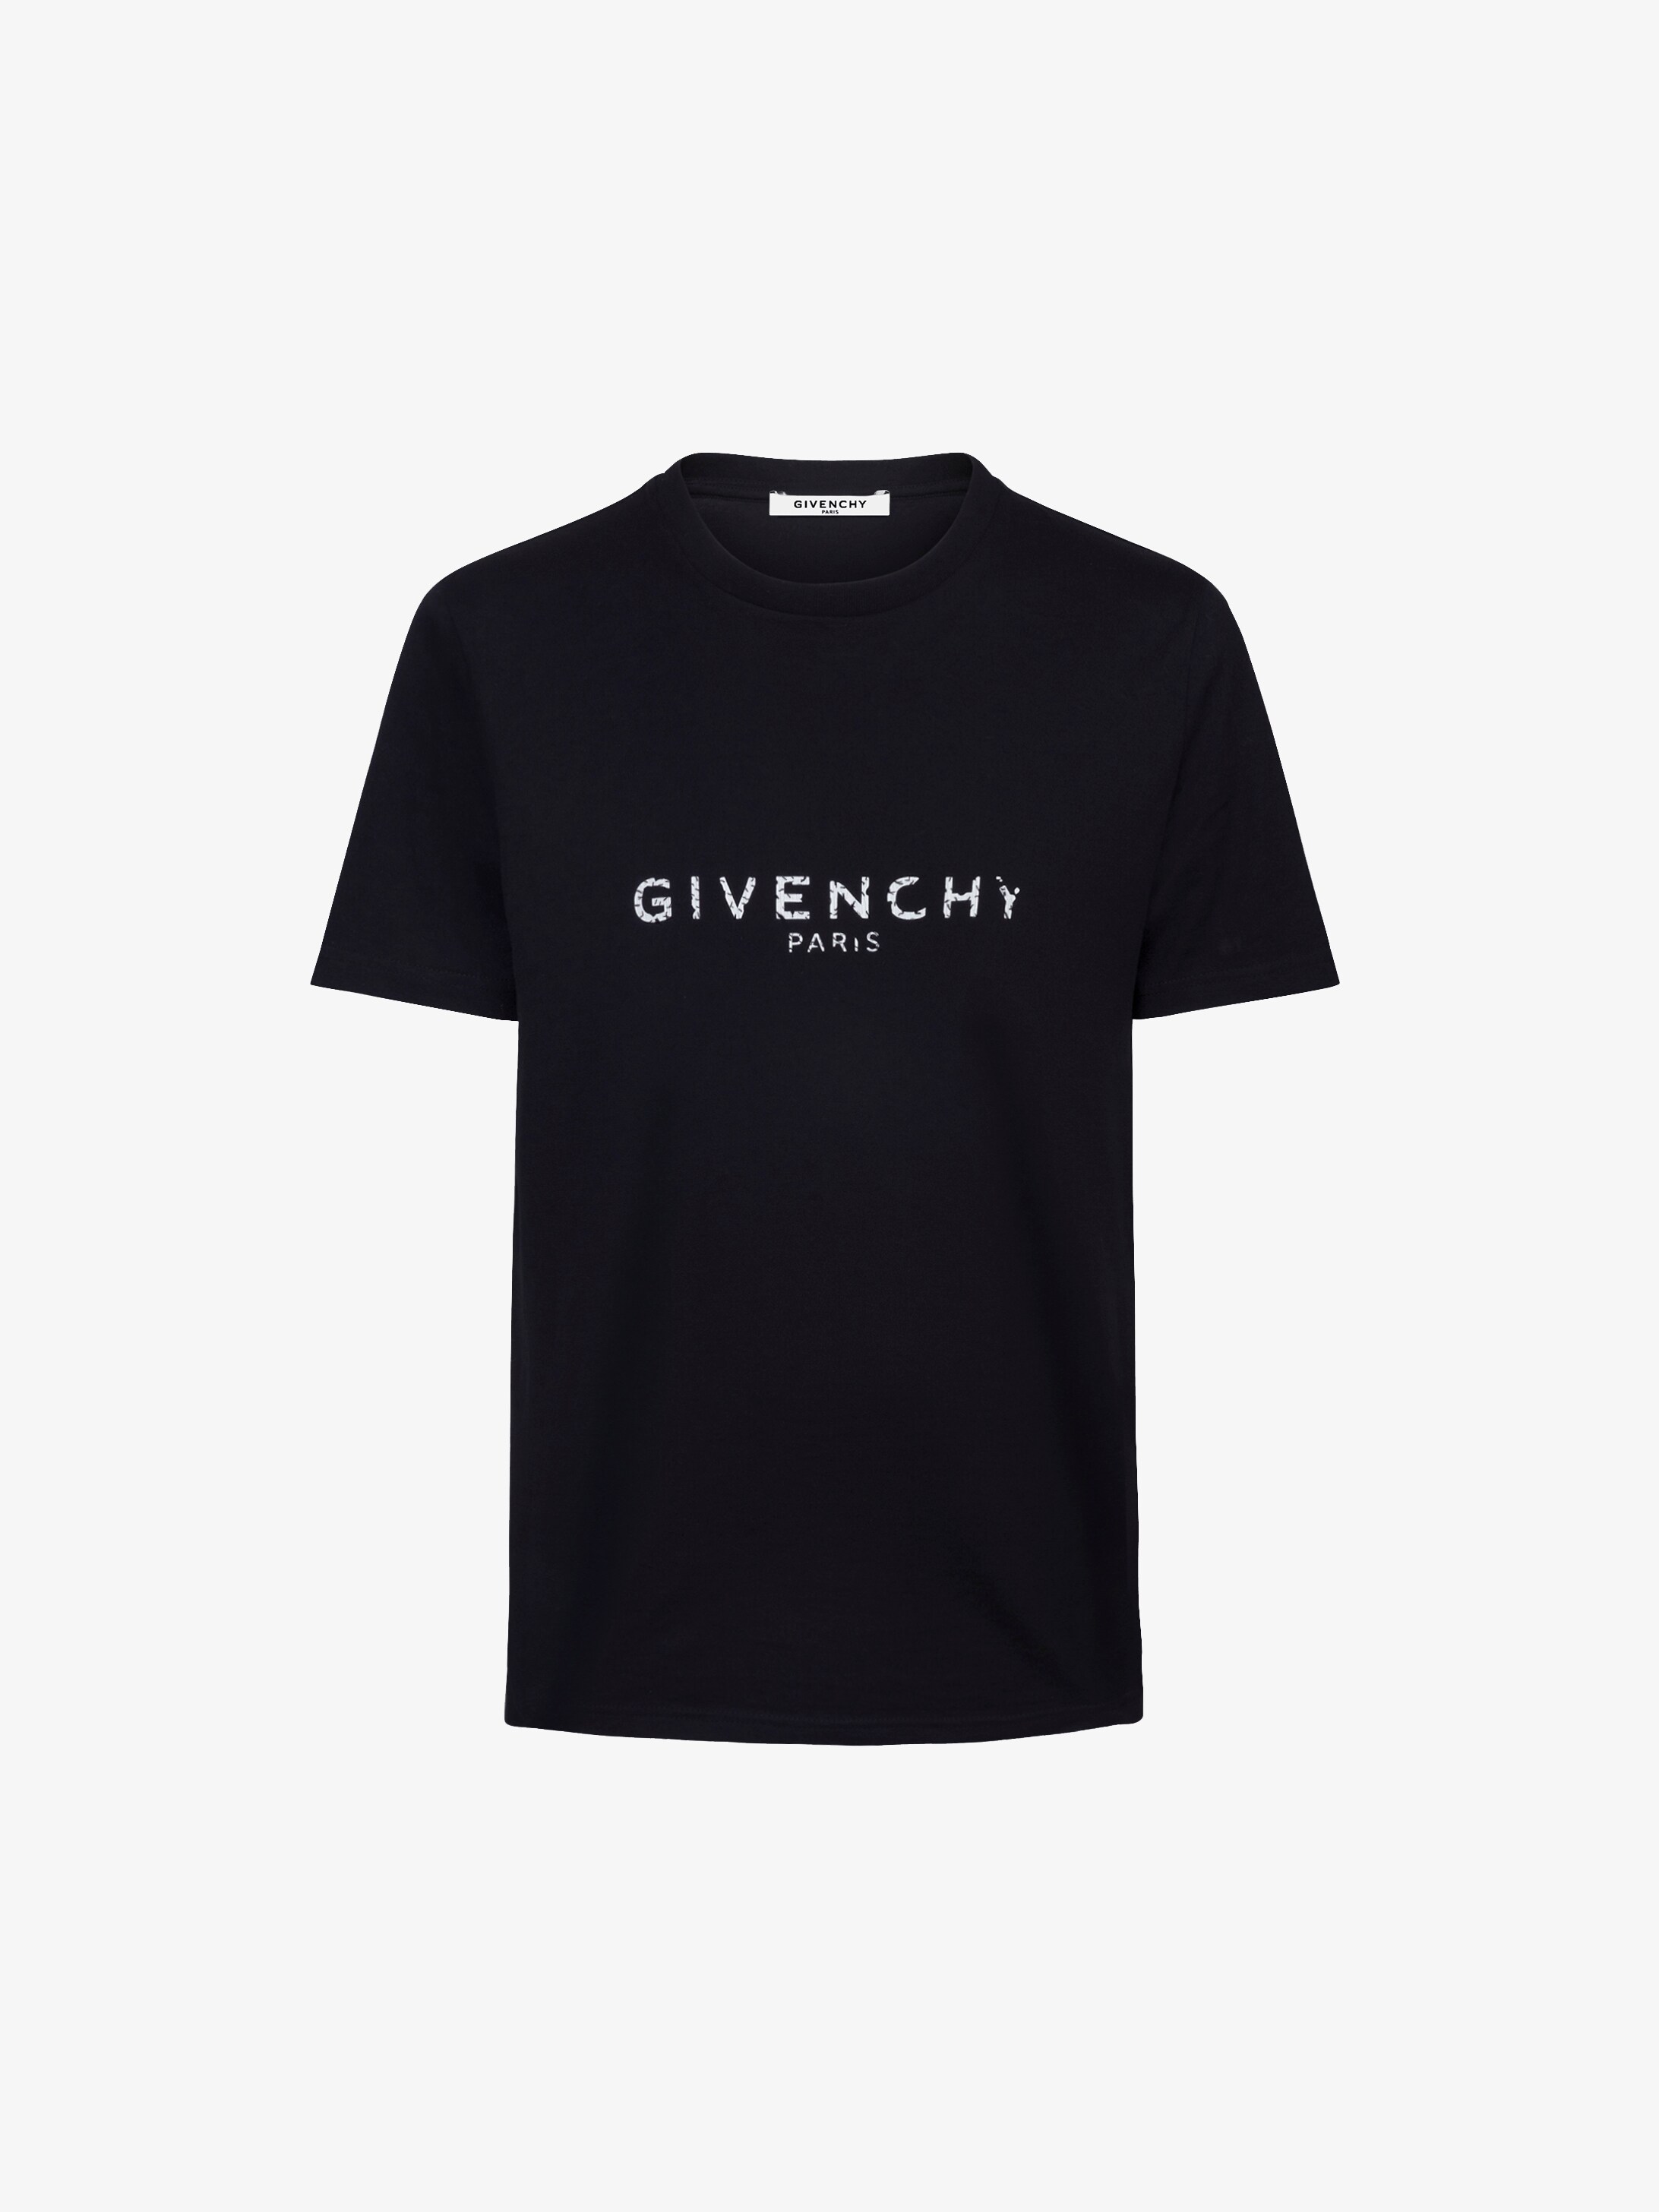 Givenchy T Shirt / Givenchy Rottweiler Cotton T-Shirt in Black for Men | Lyst